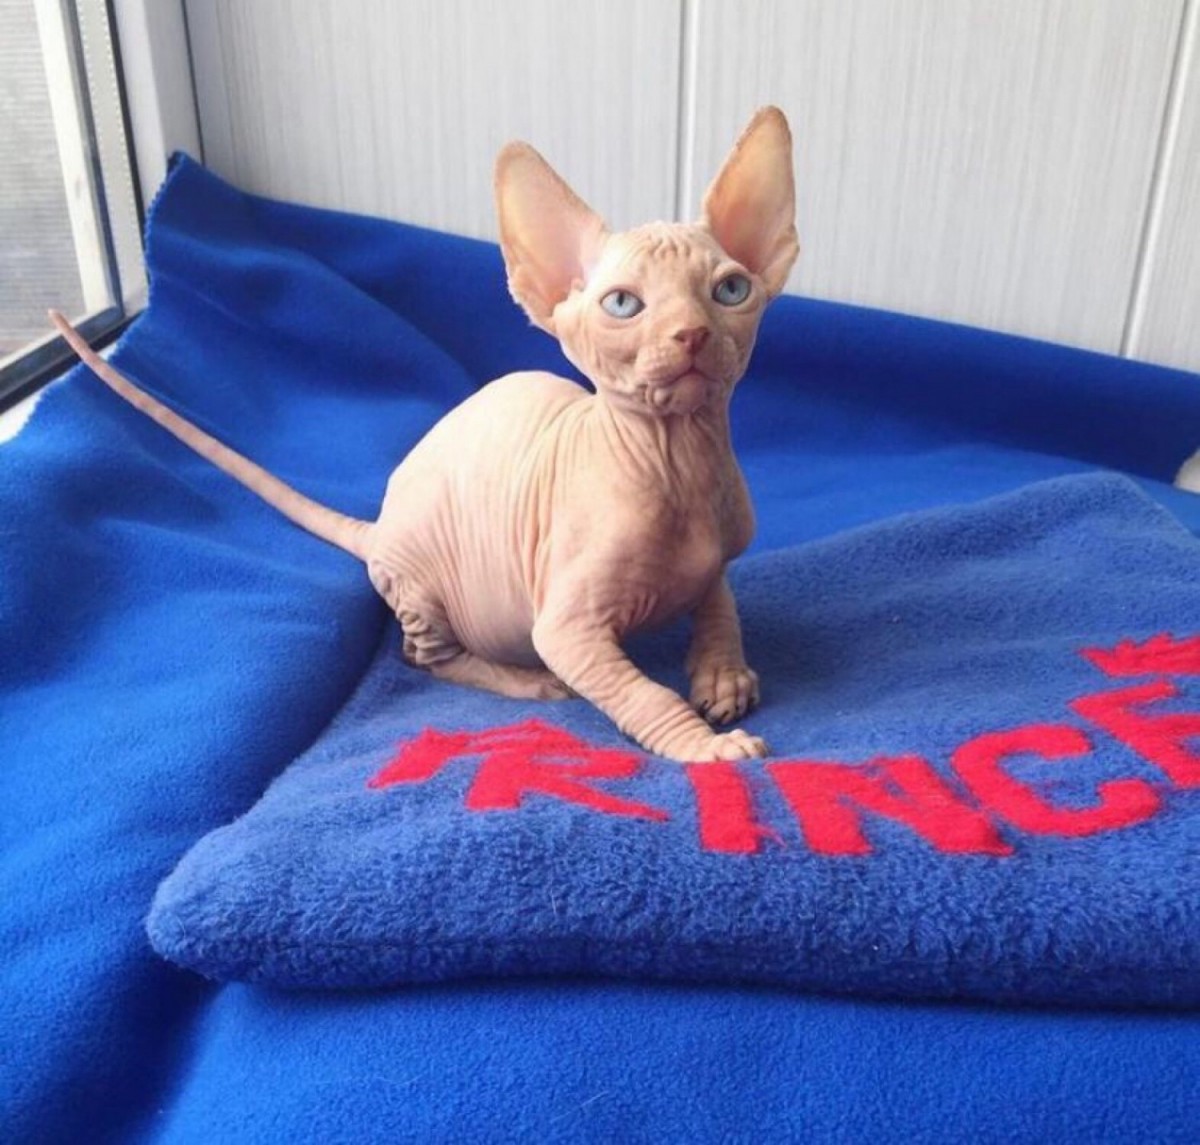 Sphynx Cats For Sale | Chicago, IL #291000 | Petzlover